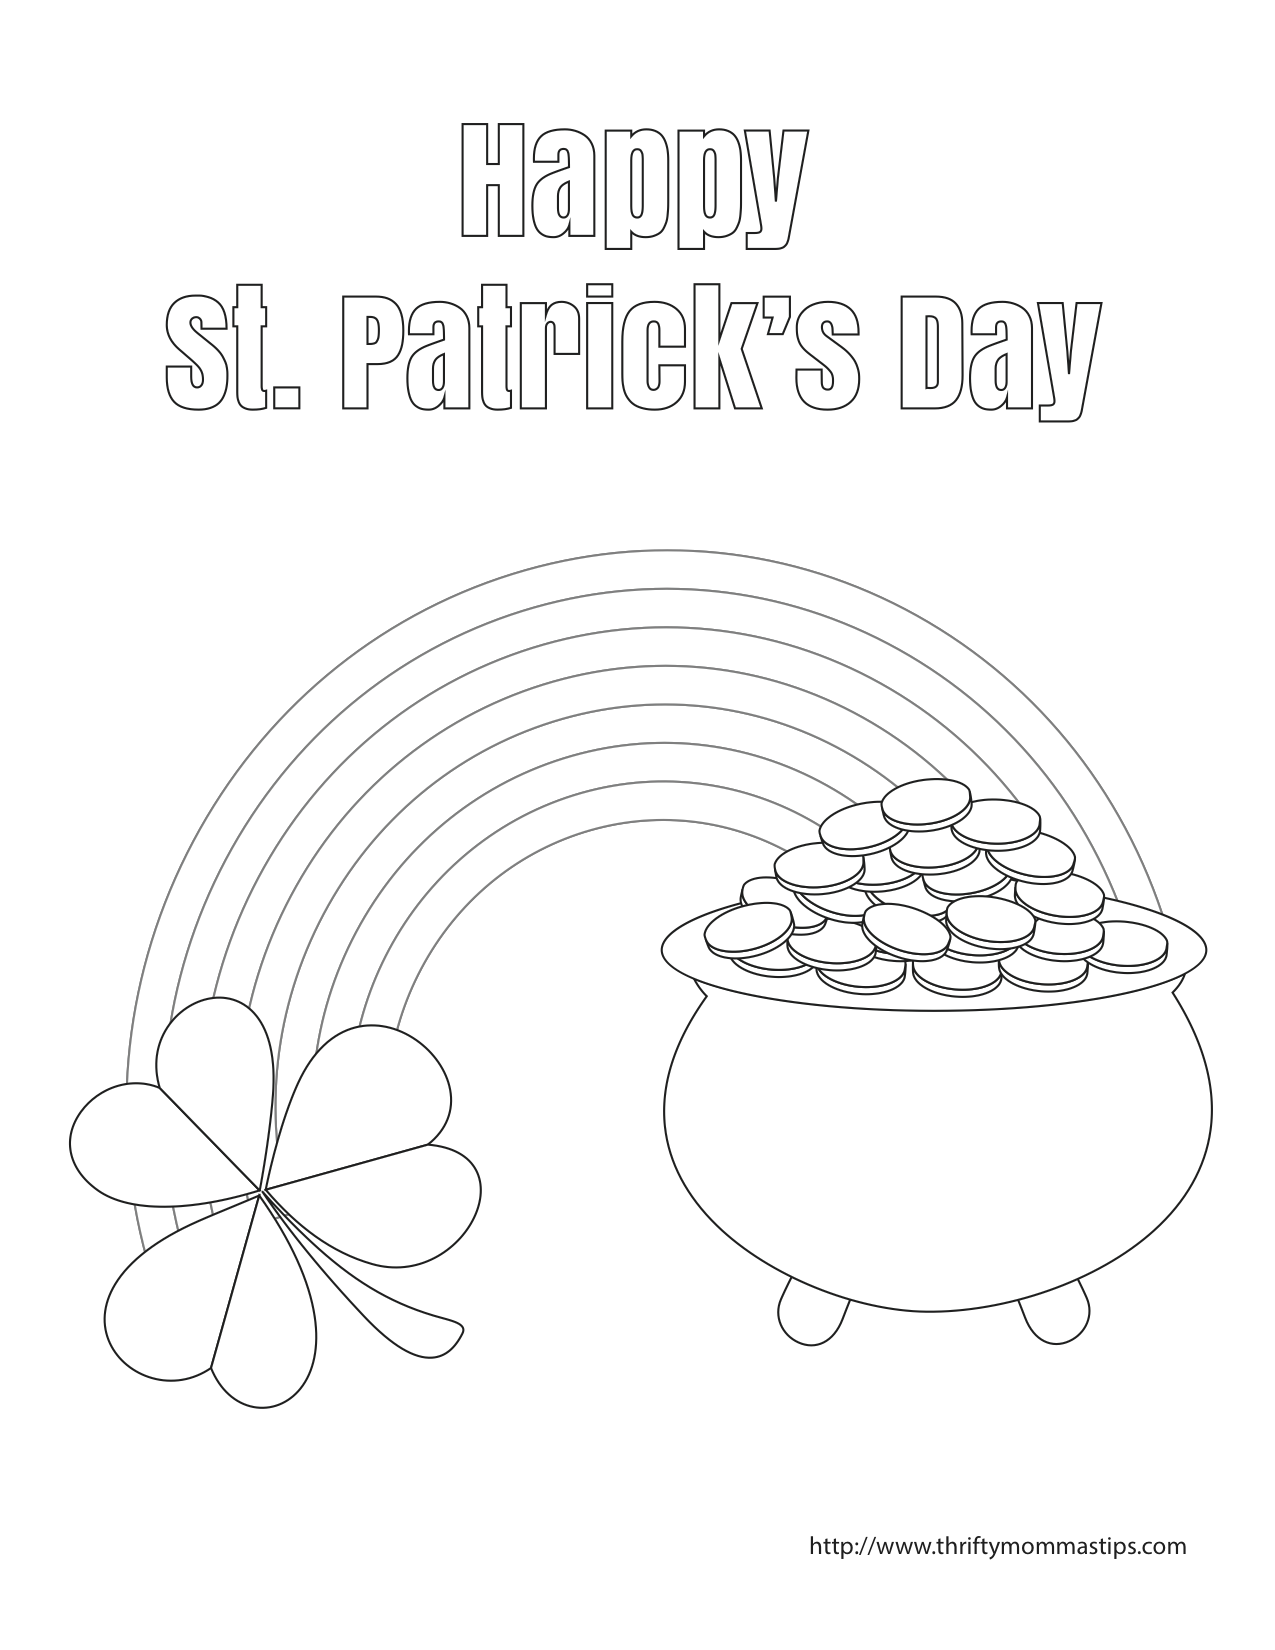 St patricks day pot of gold coloring page â thrifty mommas tips